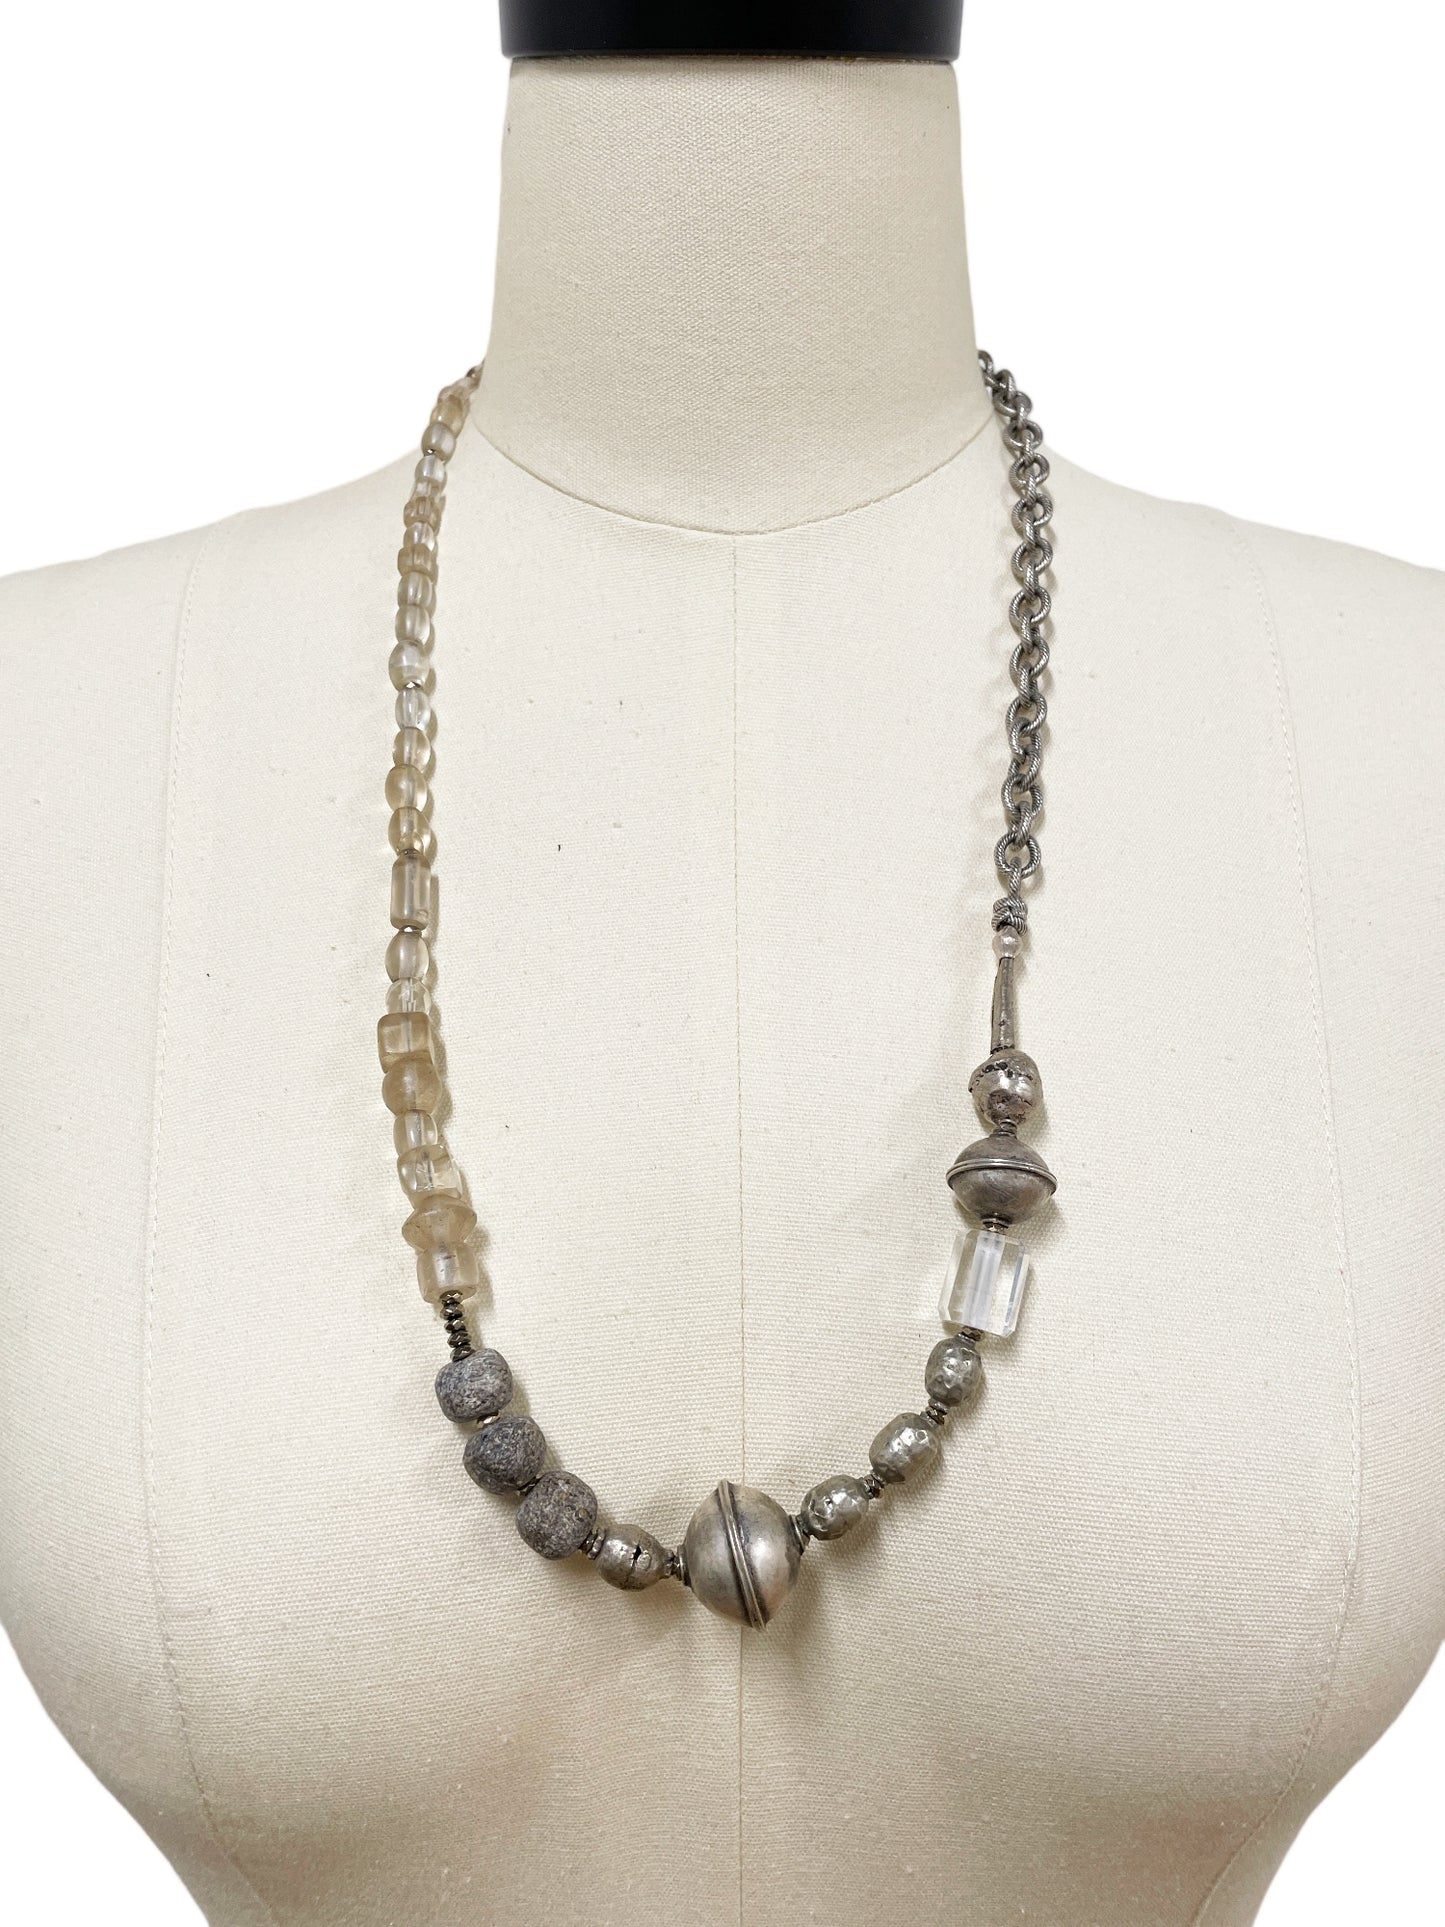 Antique Crystal and Silver Chain Necklace